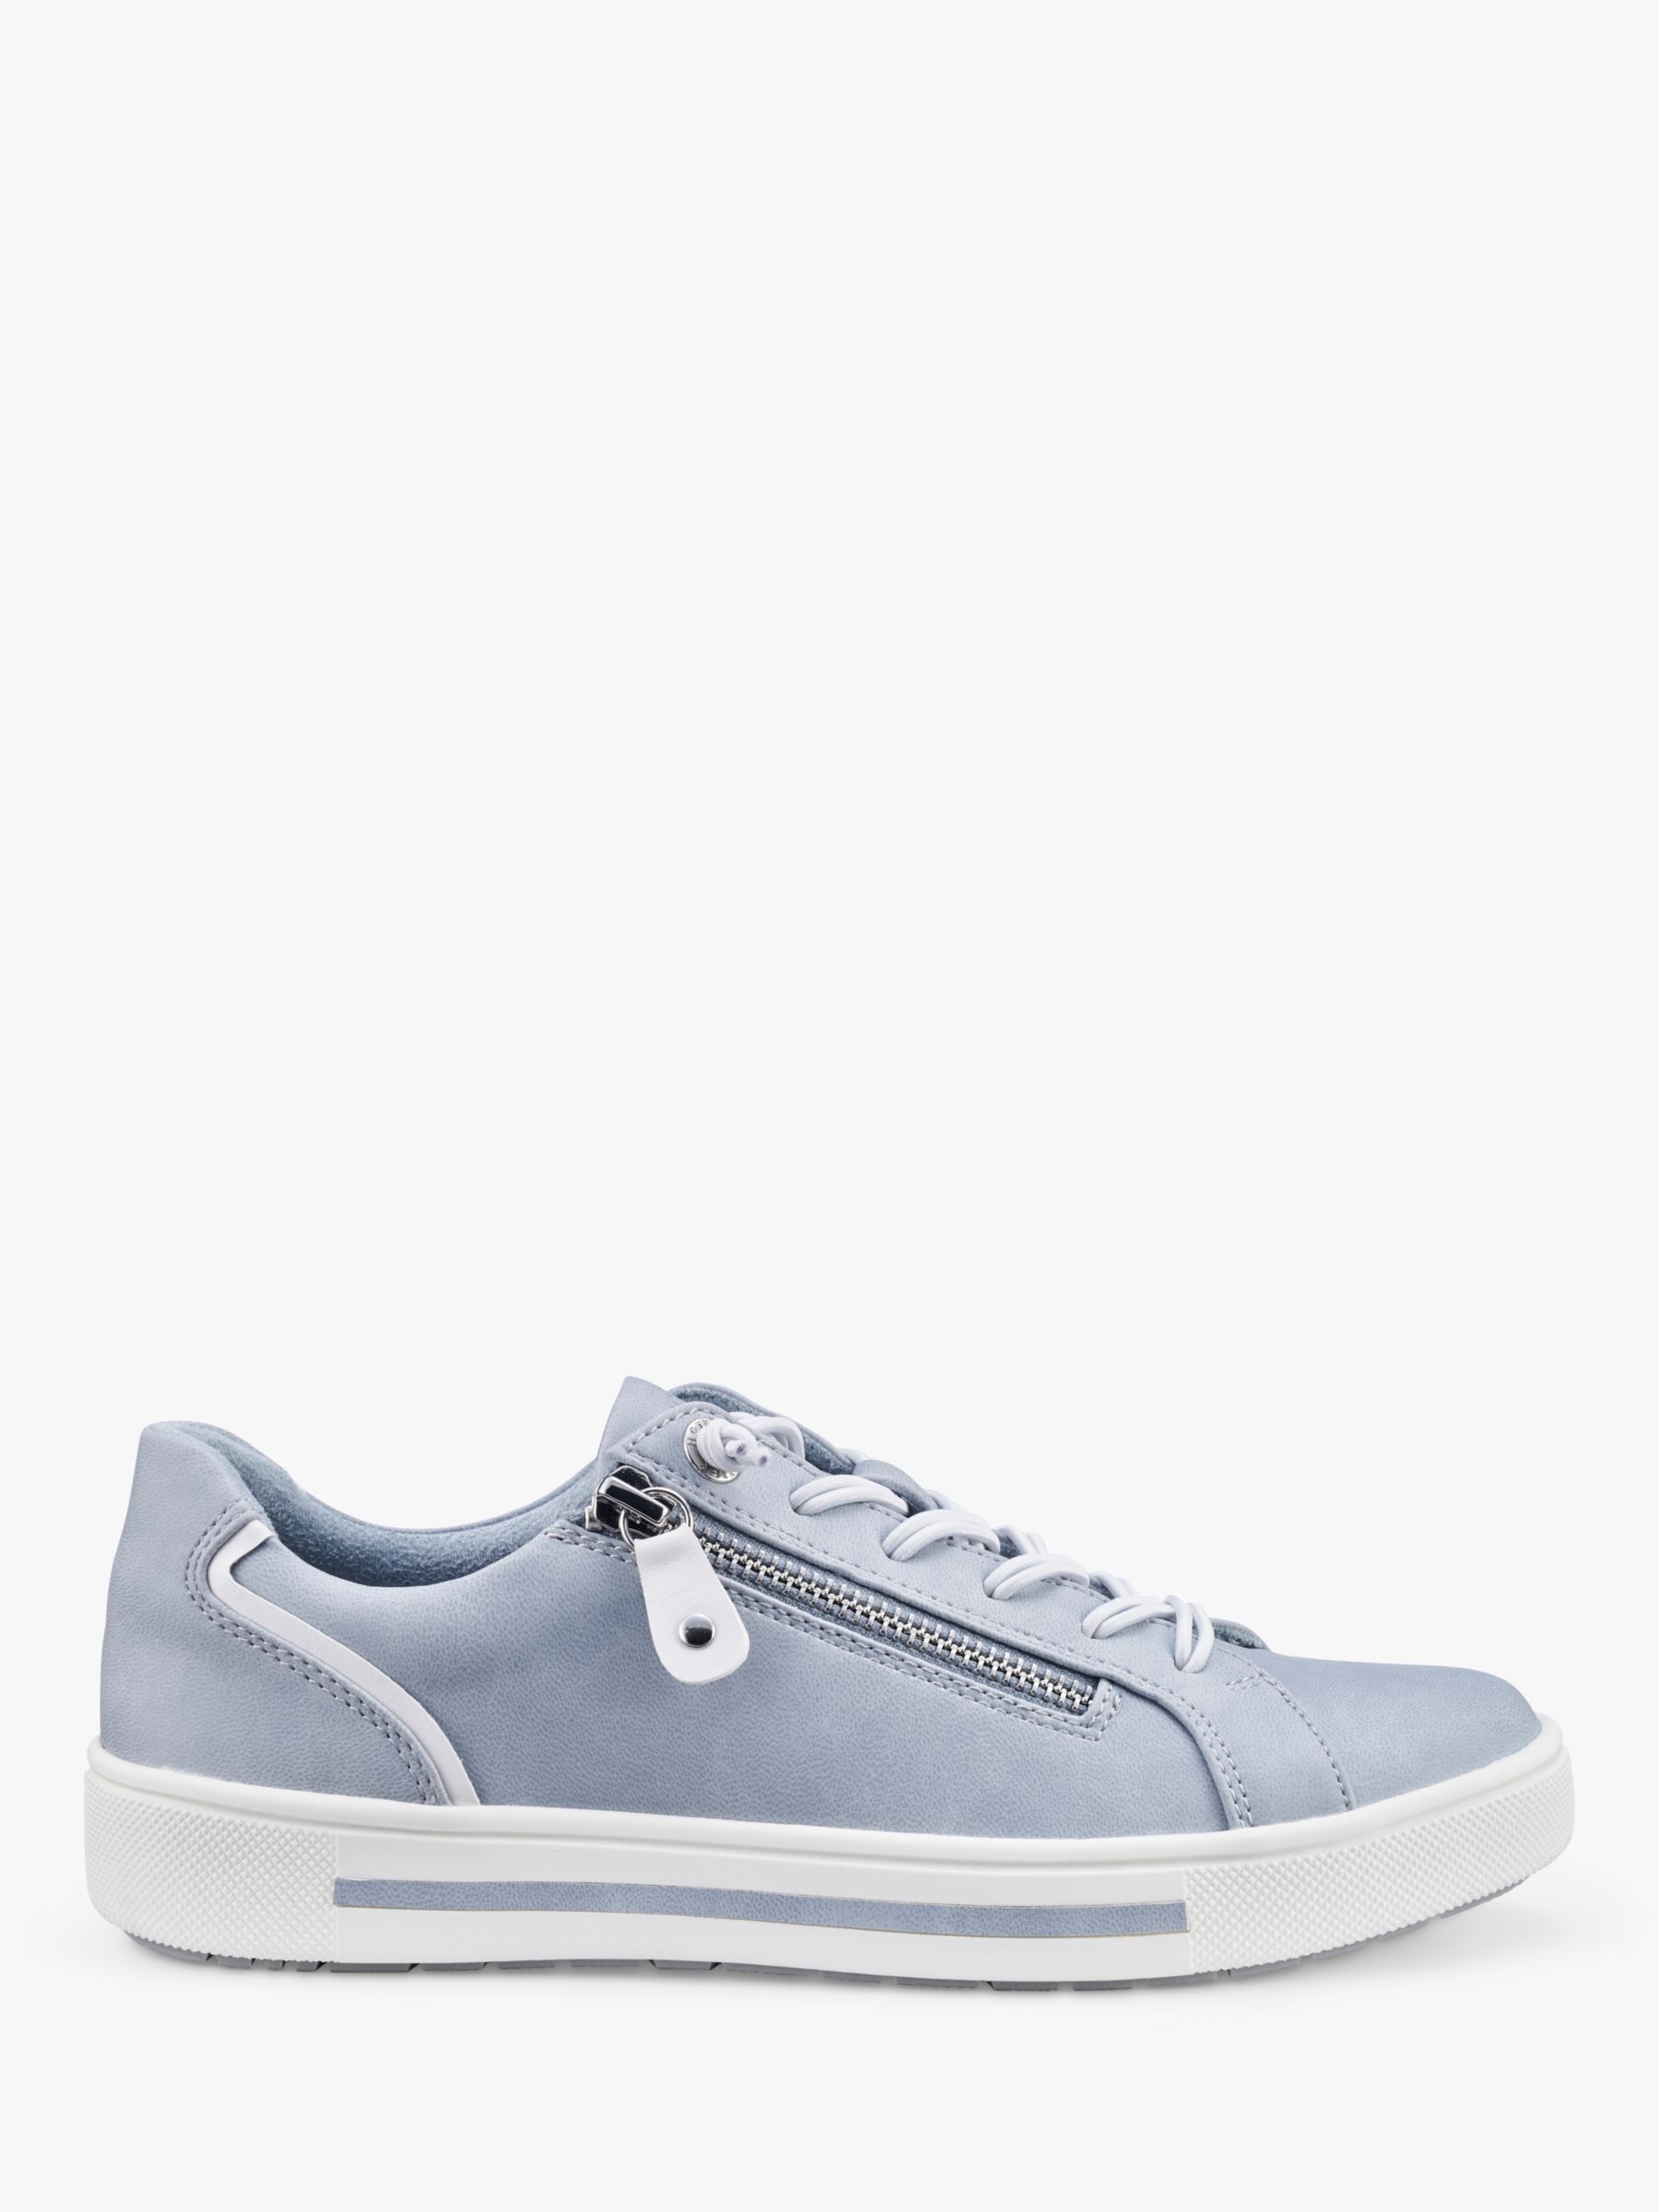 Hotter Leo Zipped Trainers, Blue, 6